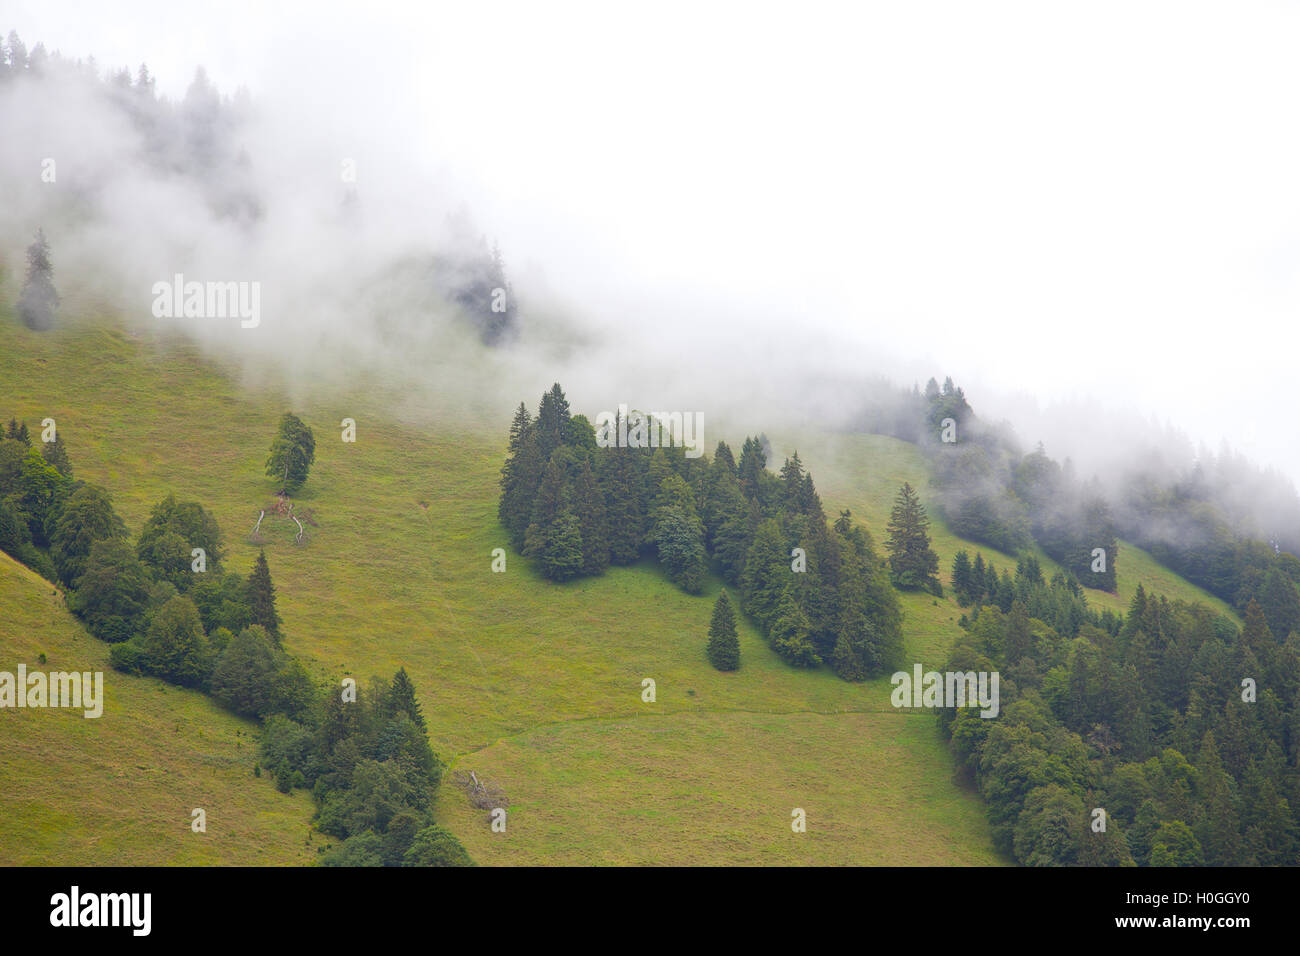 Green mountain with trees and heavy fog Stock Photo